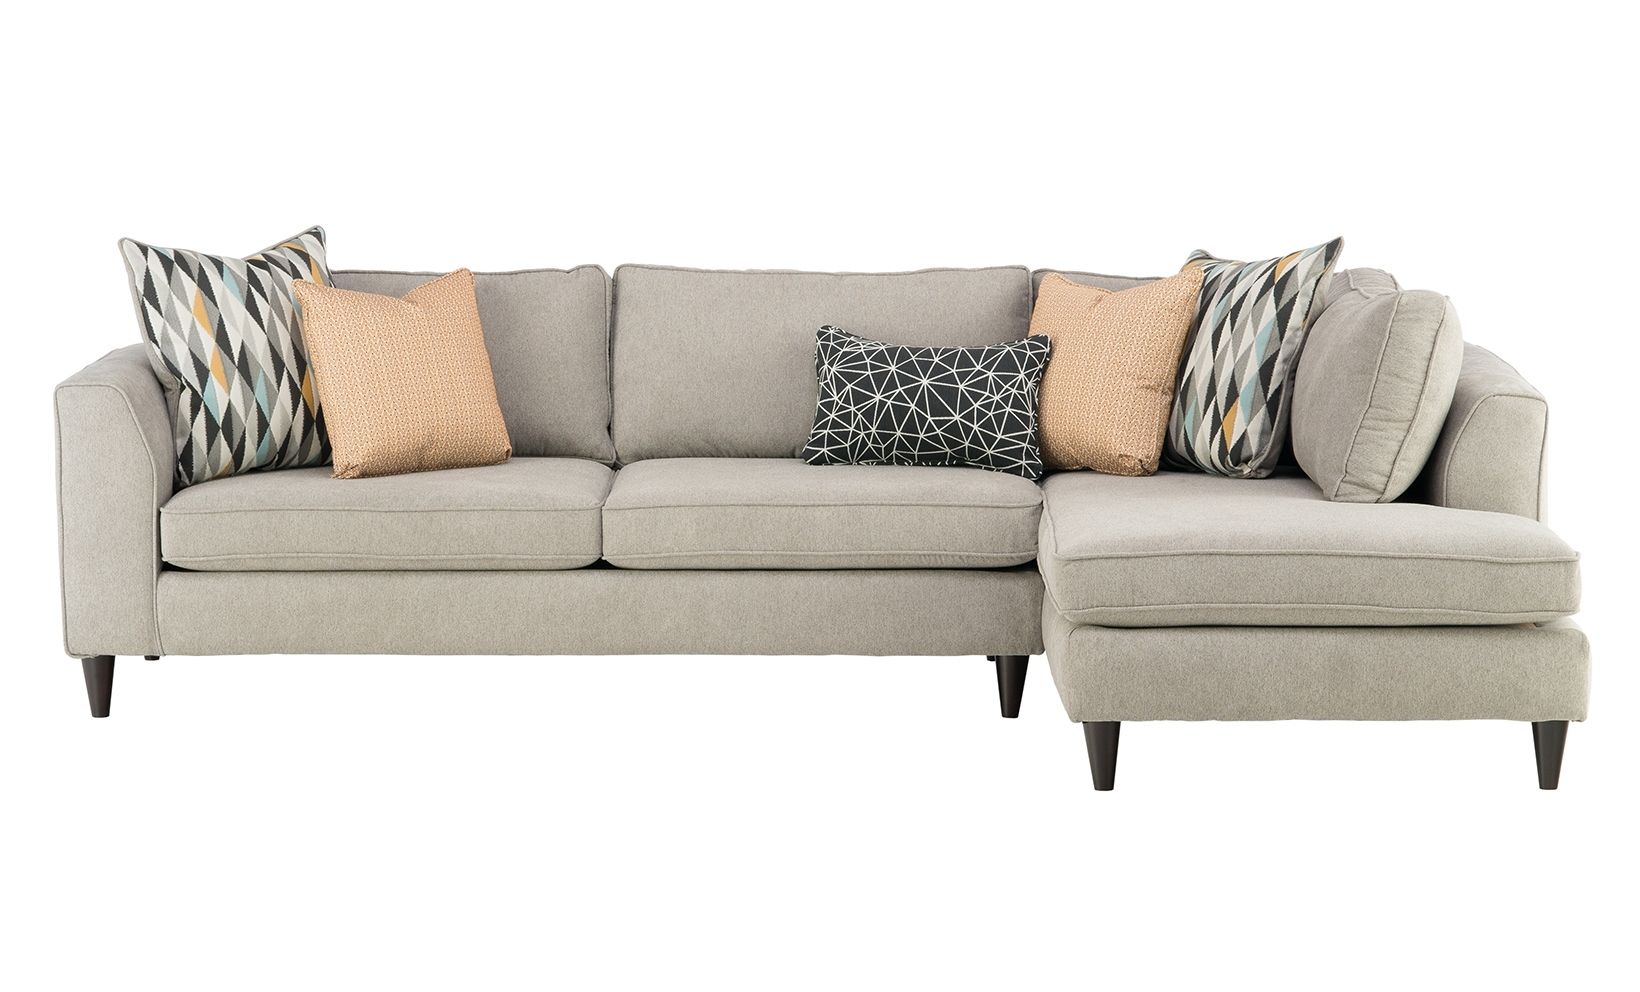 Widely Used Minneapolis Sectional Sofas Within Pebble Sectional (View 1 of 15)